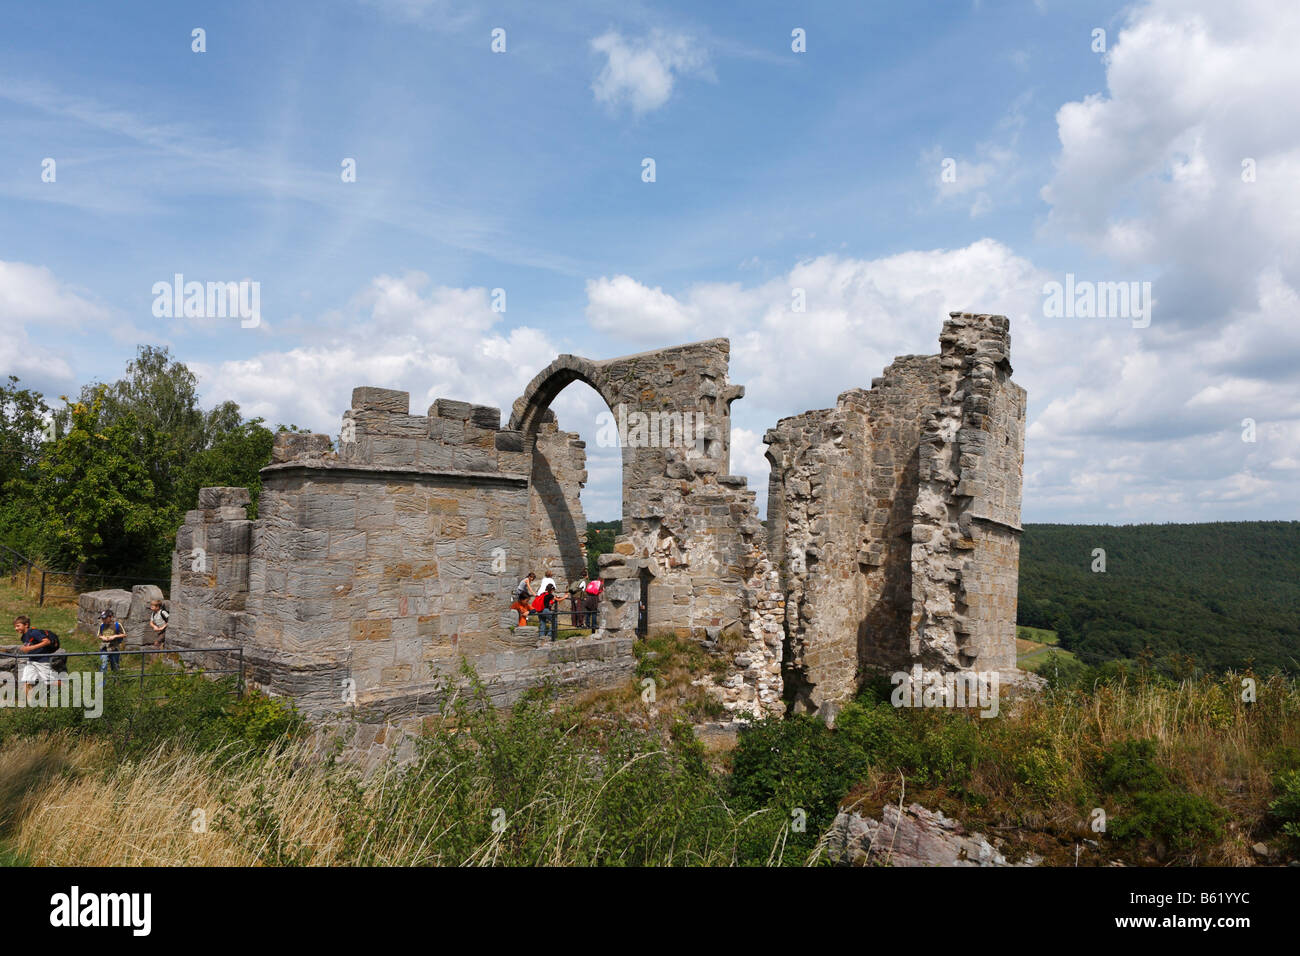 Ruins of the Altenstein Castle, Hassberge, Lower Franconia, Bavaria, Germany, Europe Stock Photo